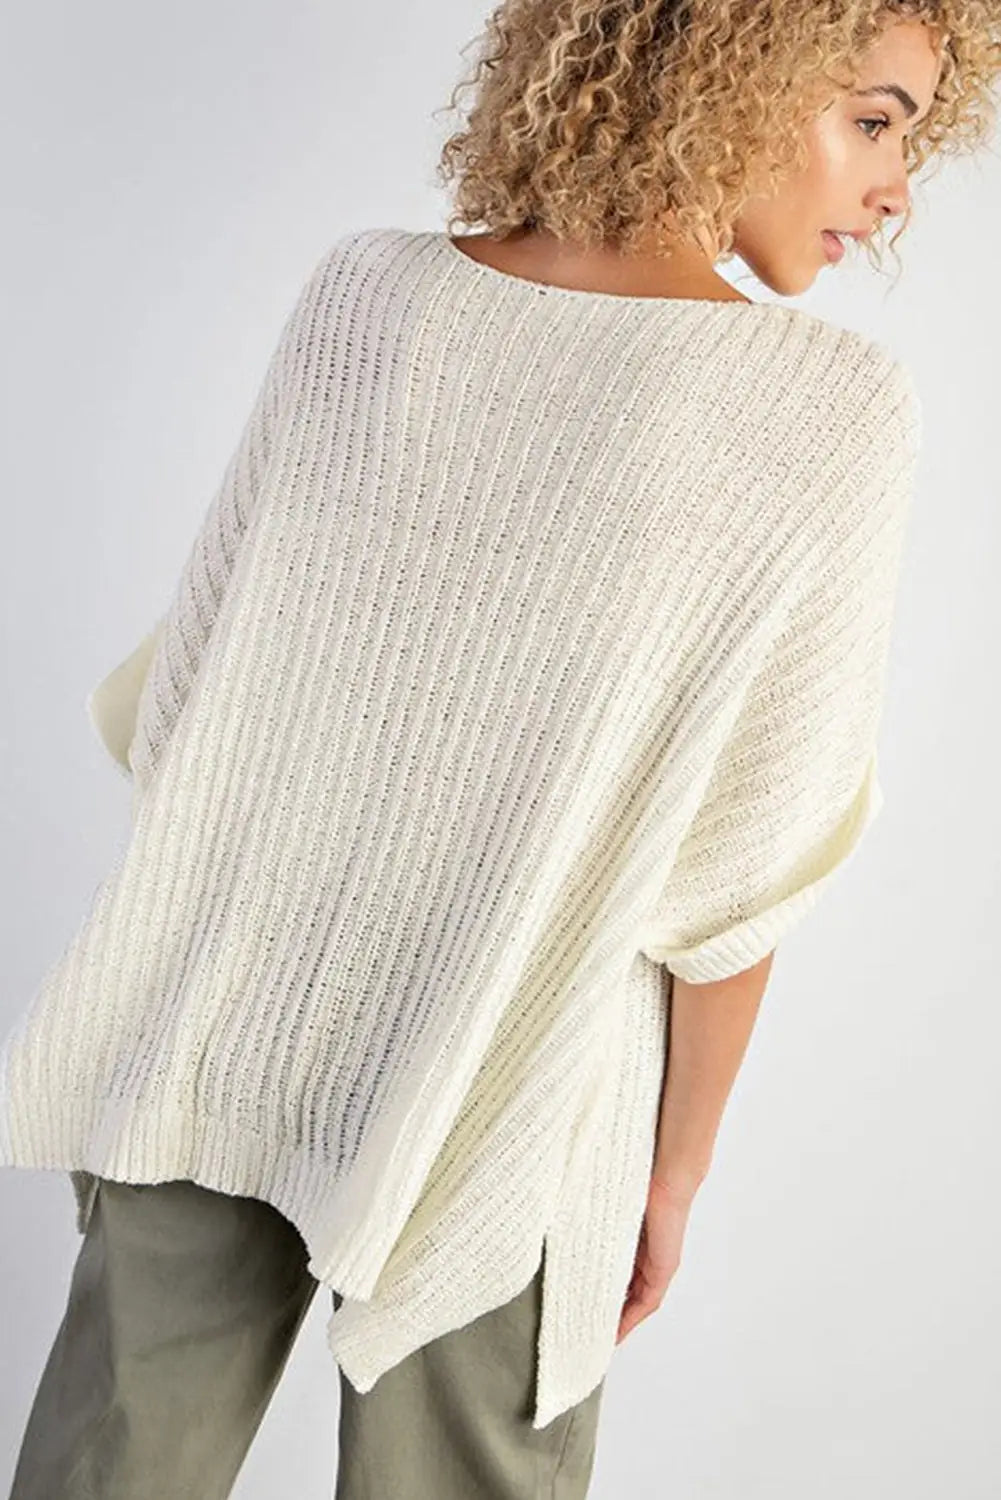 Loose knit tee - white rolled cuffs with slits - short sleeve sweaters